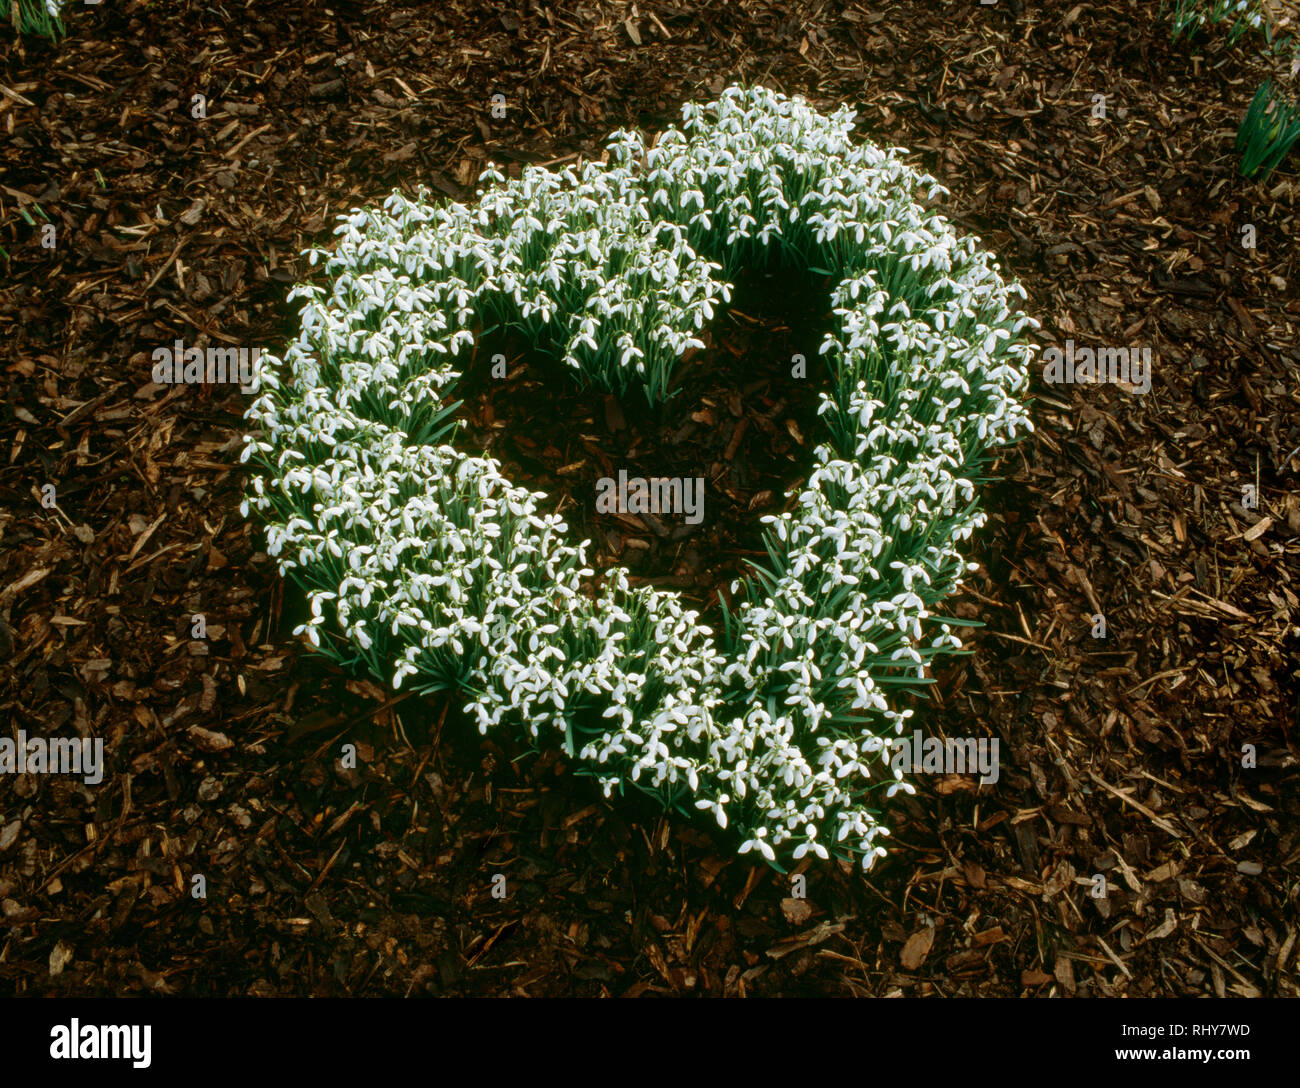 Snowdrops planted in a  heart shape to make a garden feature under trees. Mulched with with composted bark. Stock Photo